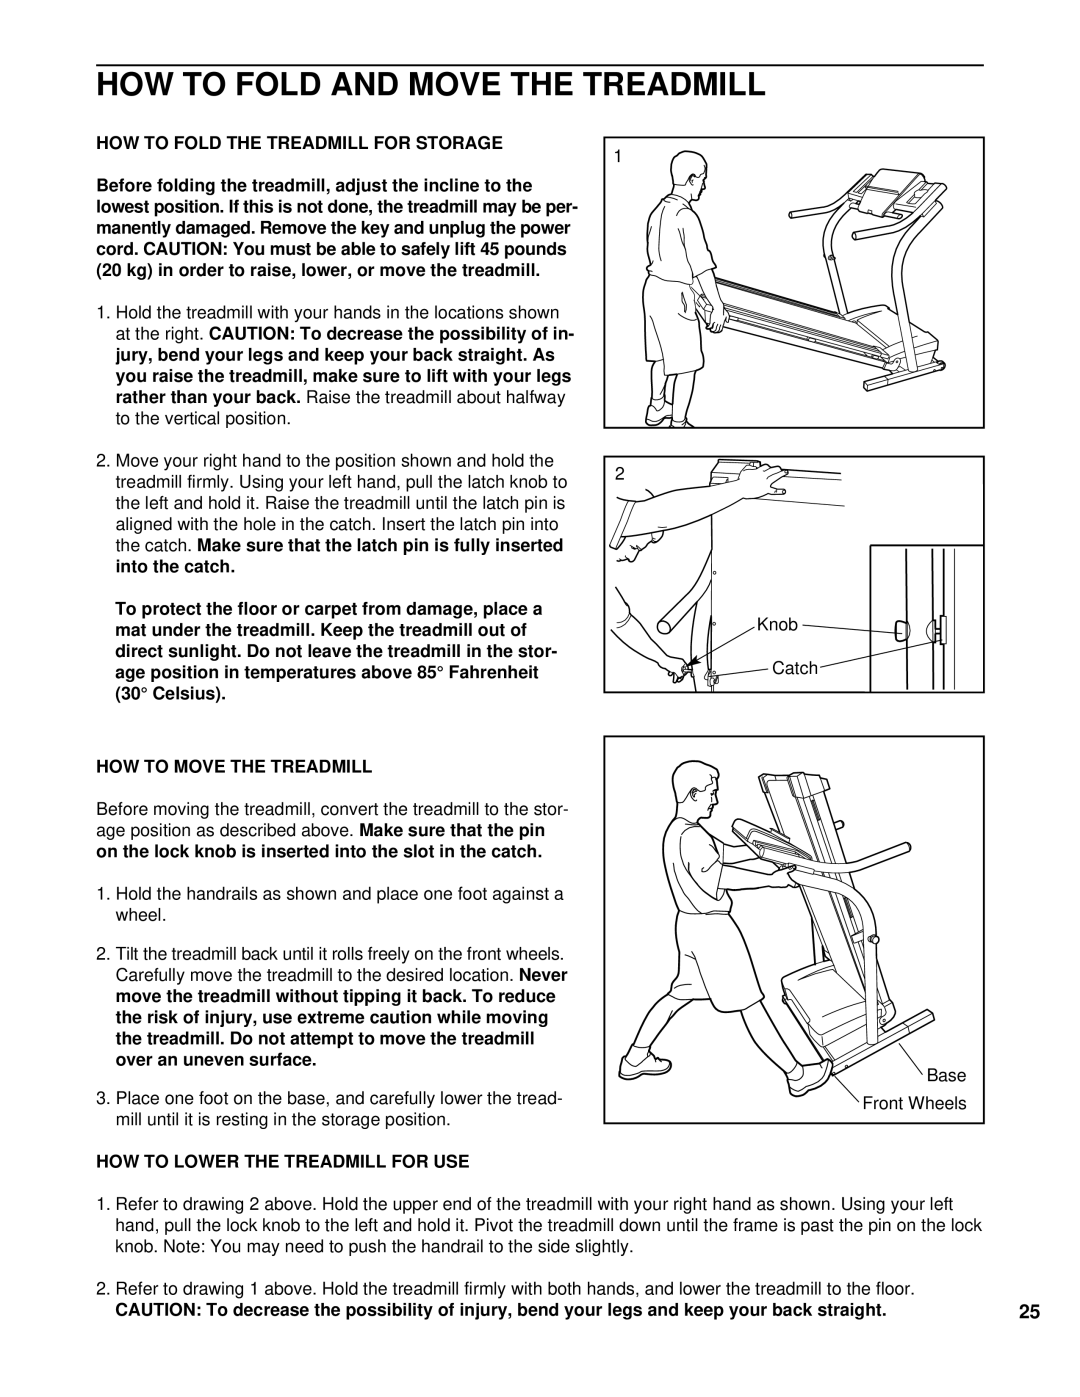 NordicTrack NCTL11991 HOW to Fold and Move the Treadmill, HOW to Fold the Treadmill for Storage, HOW to Move the Treadmill 